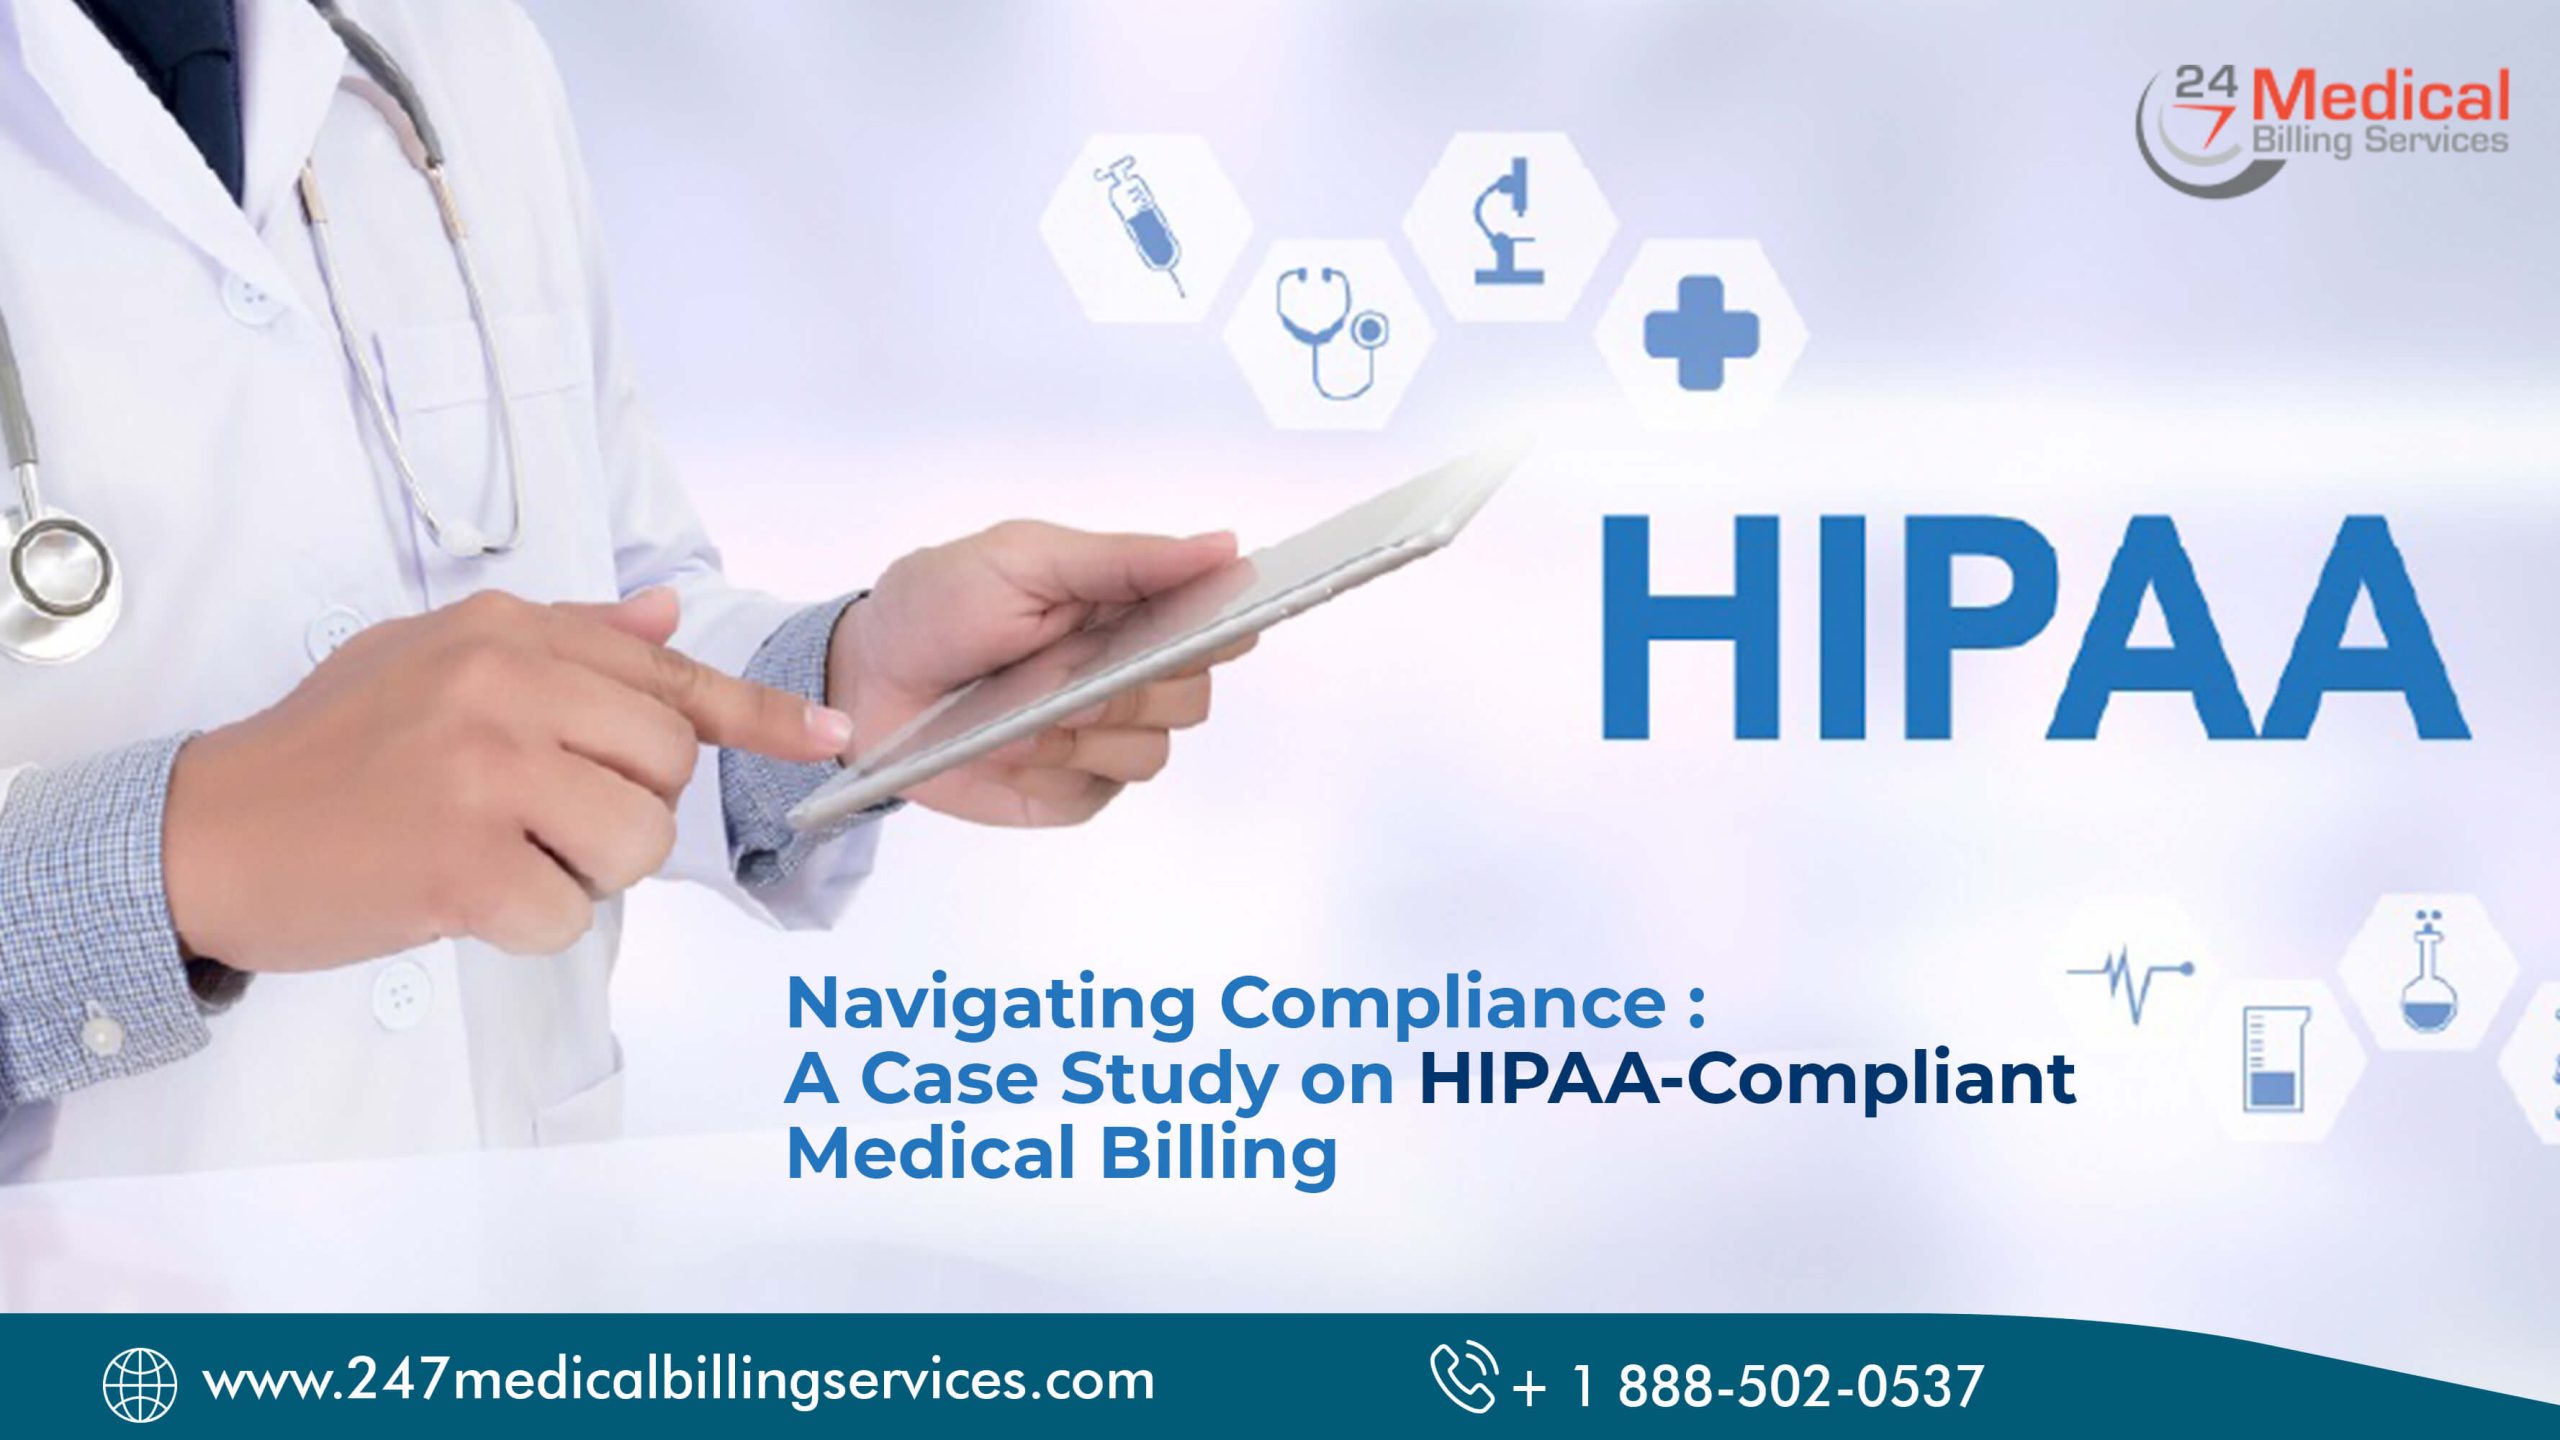  Case Study: Navigating Compliance with HIPAA-Compliant Medical Billing